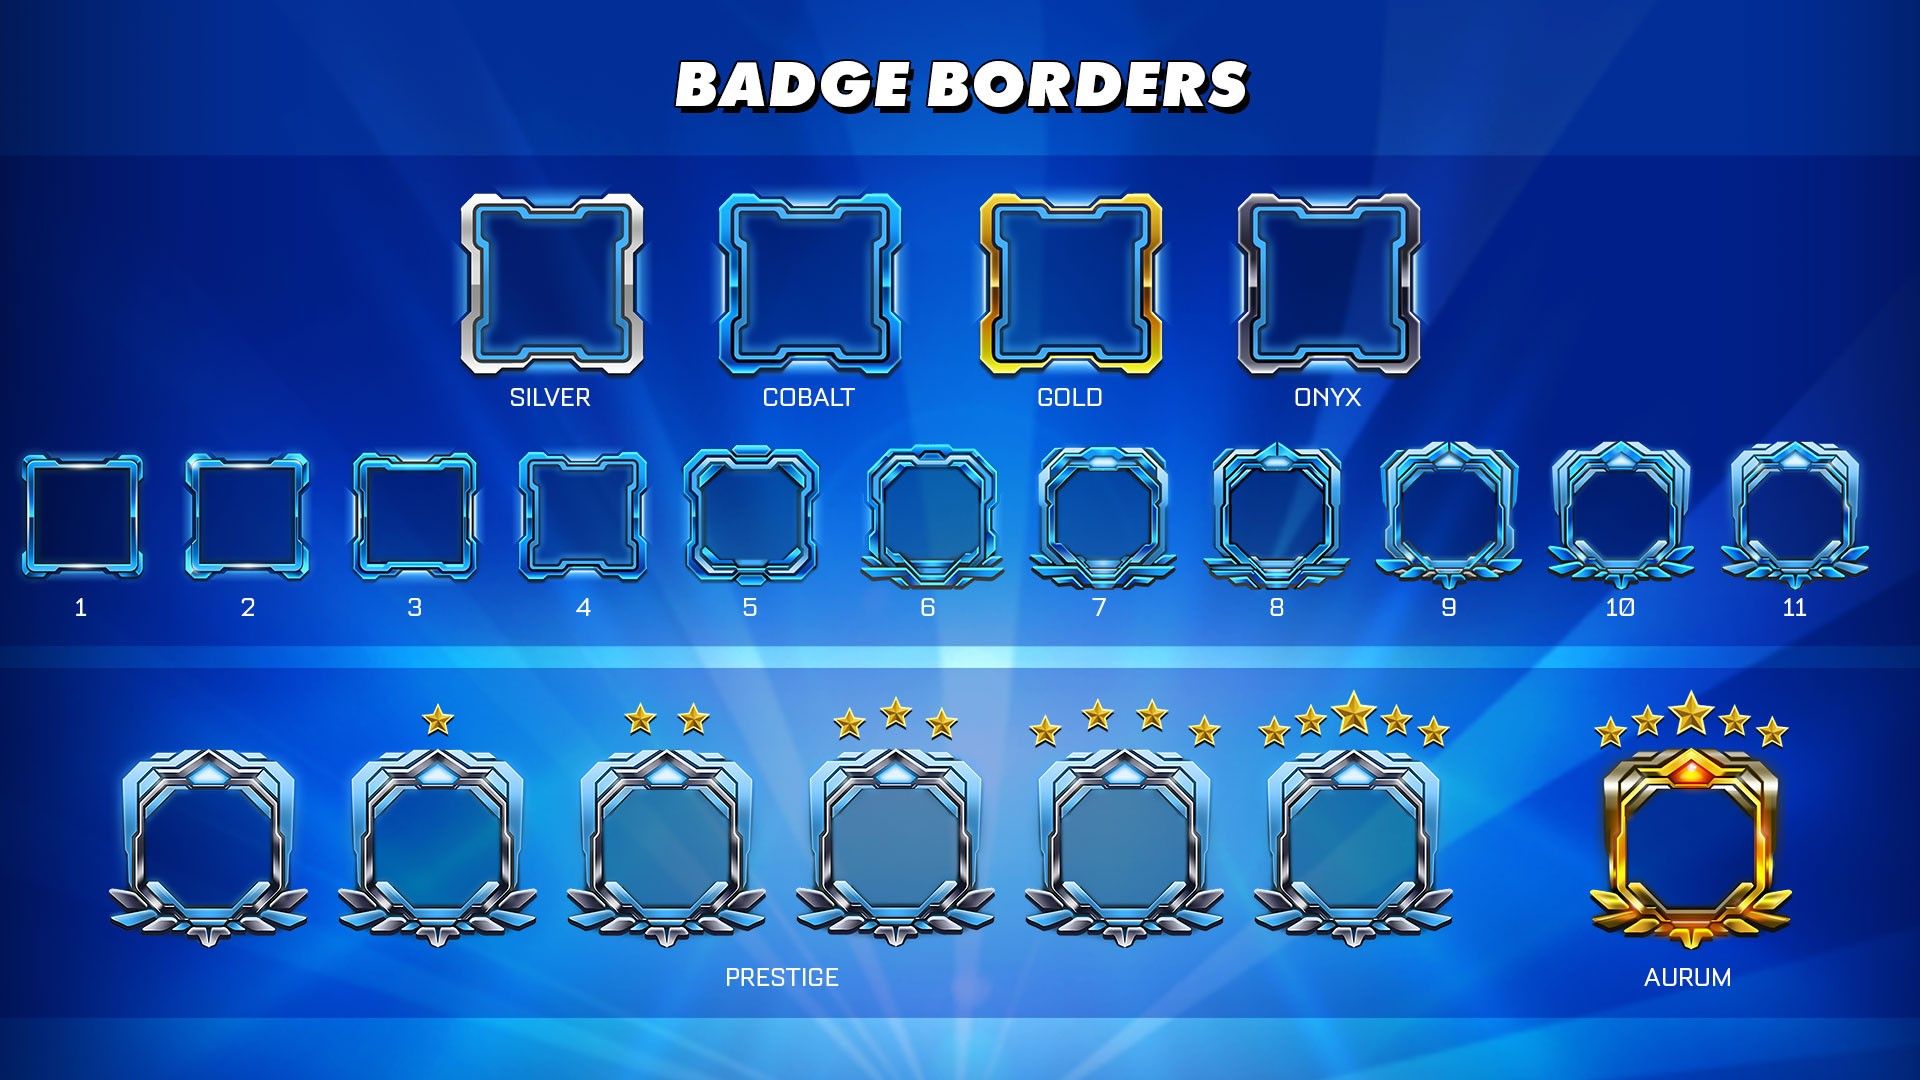 The image shows every new Badge Border, which is a new feature explained below.